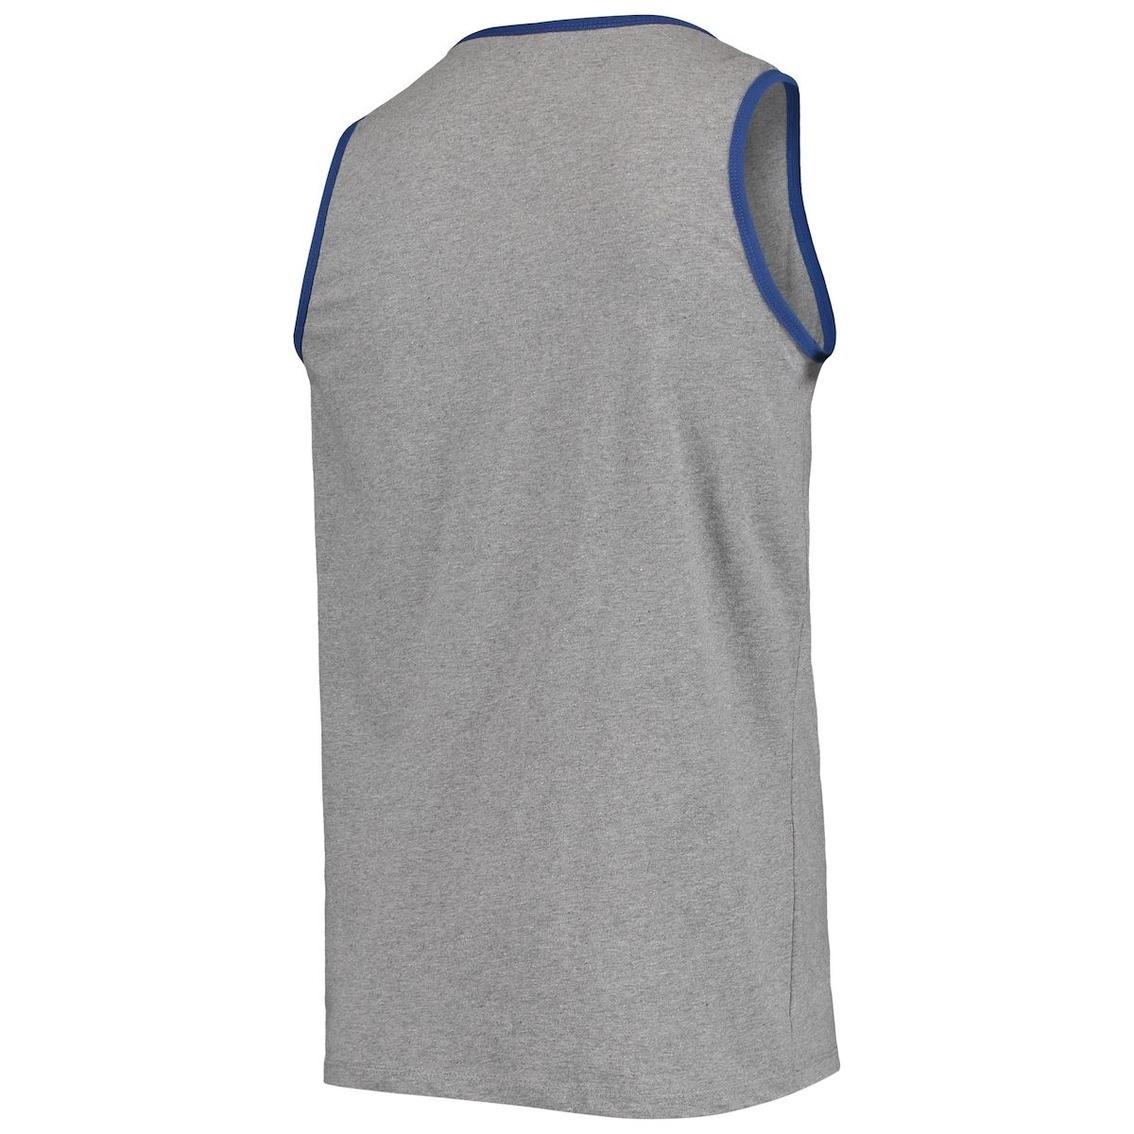 '47 Men's Heathered Gray Los Angeles Dodgers Edge Super Rival Tank Top - Image 4 of 4